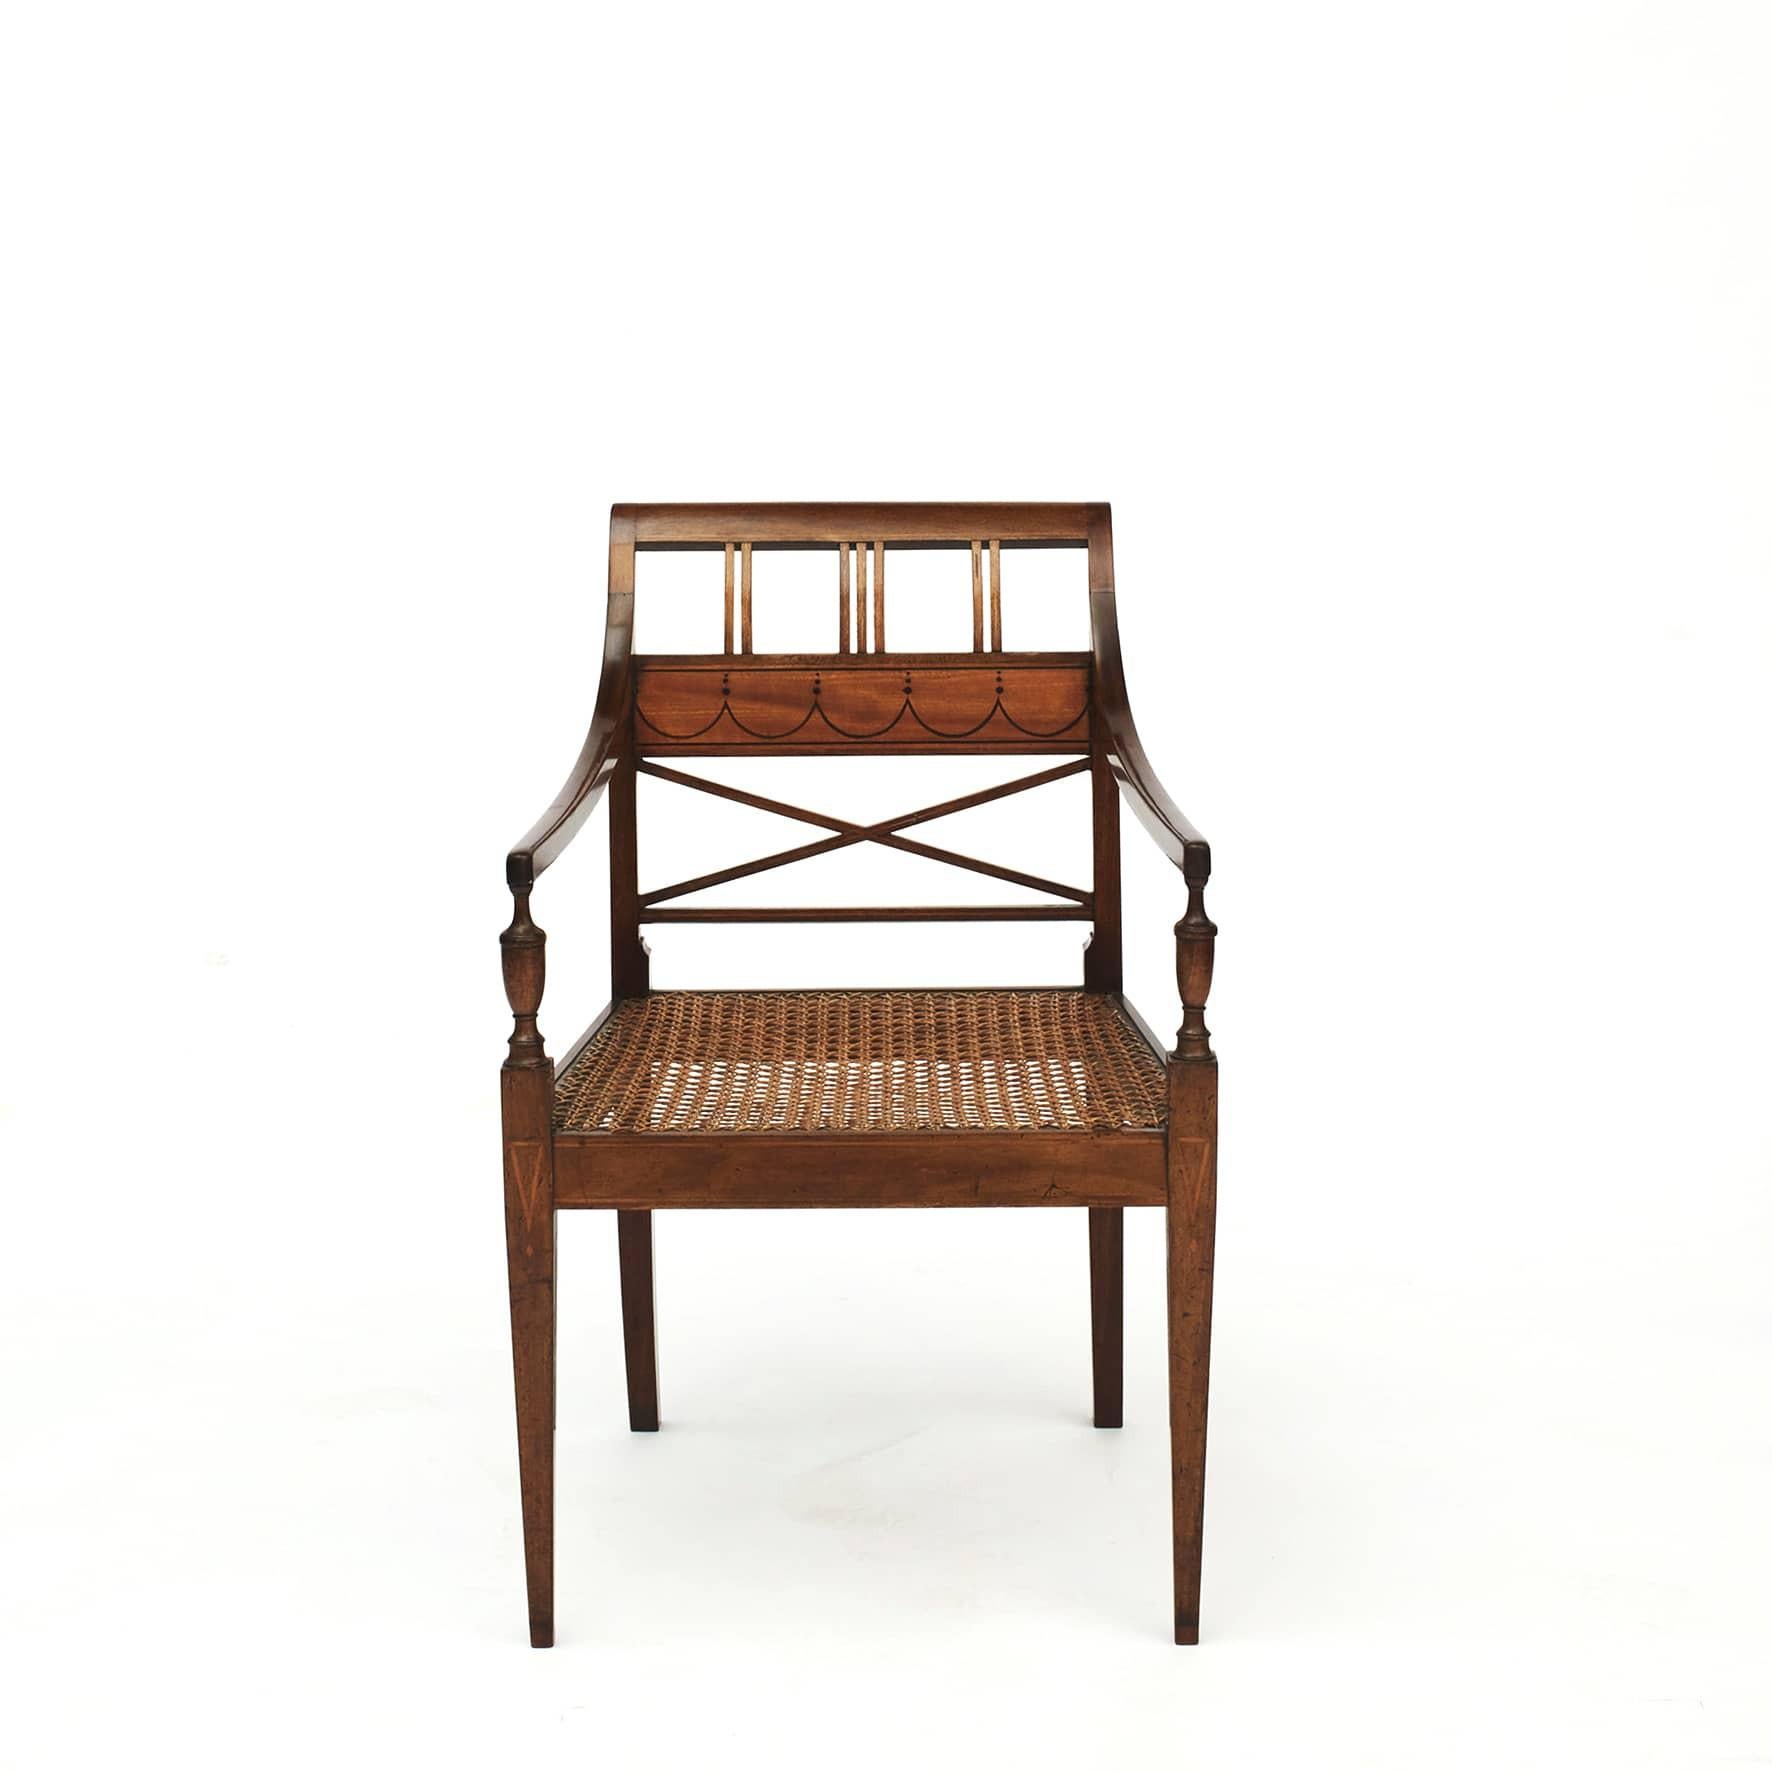 Pair of elegant Empire armchairs in mahogany and satinwood.
Satinwood and walnut wood marquetry inlaid on back, front frieze and legs.
Seat with wicker (one renewed). 
Denmark, Copenhagen approx. 1810.

Measure: Seat height: 42 cm.
 